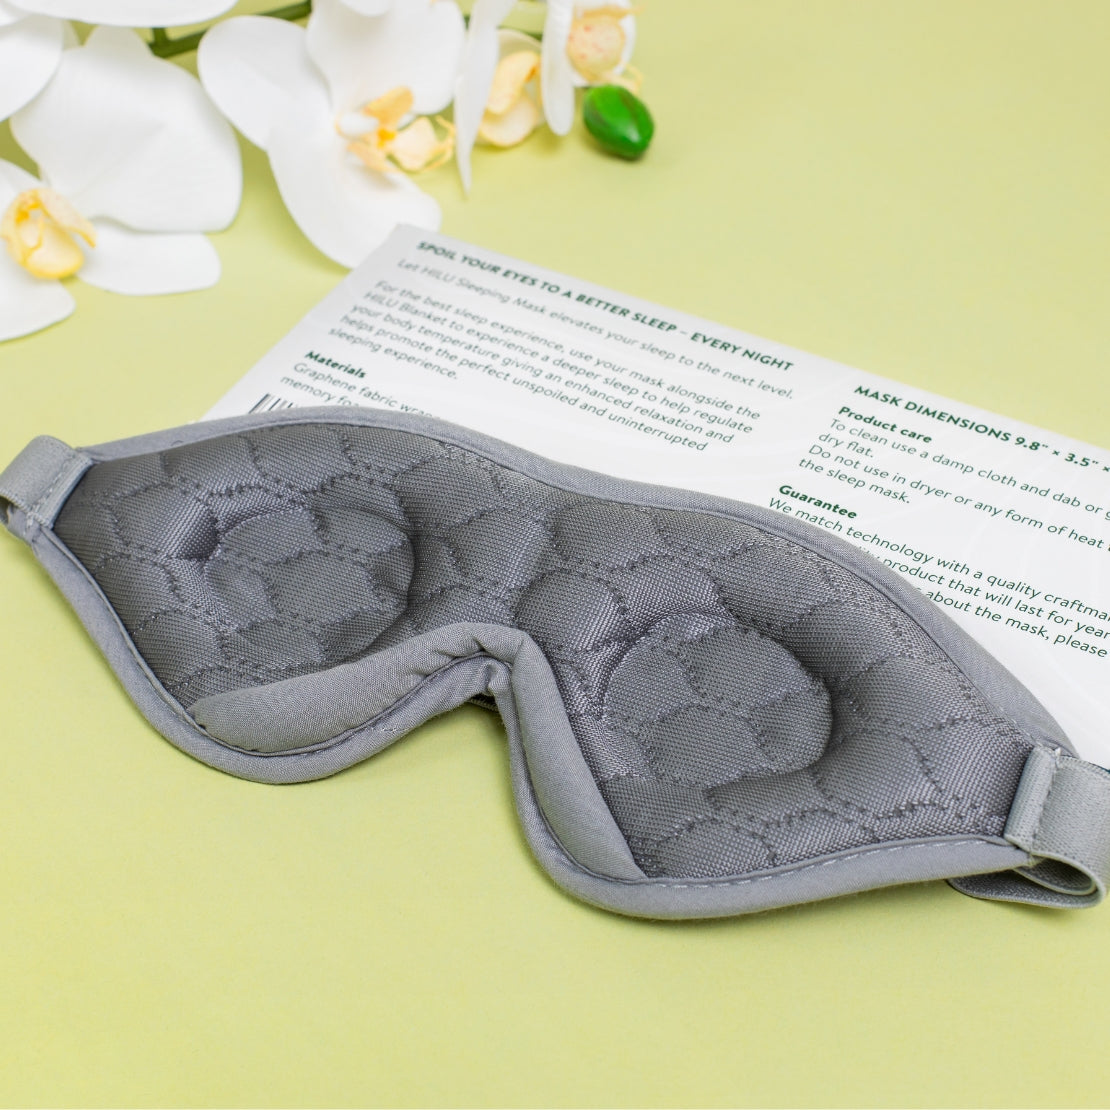 Grey HILU sleeping mask with quilted pattern placed on a yellow background alongside white orchid flowers.